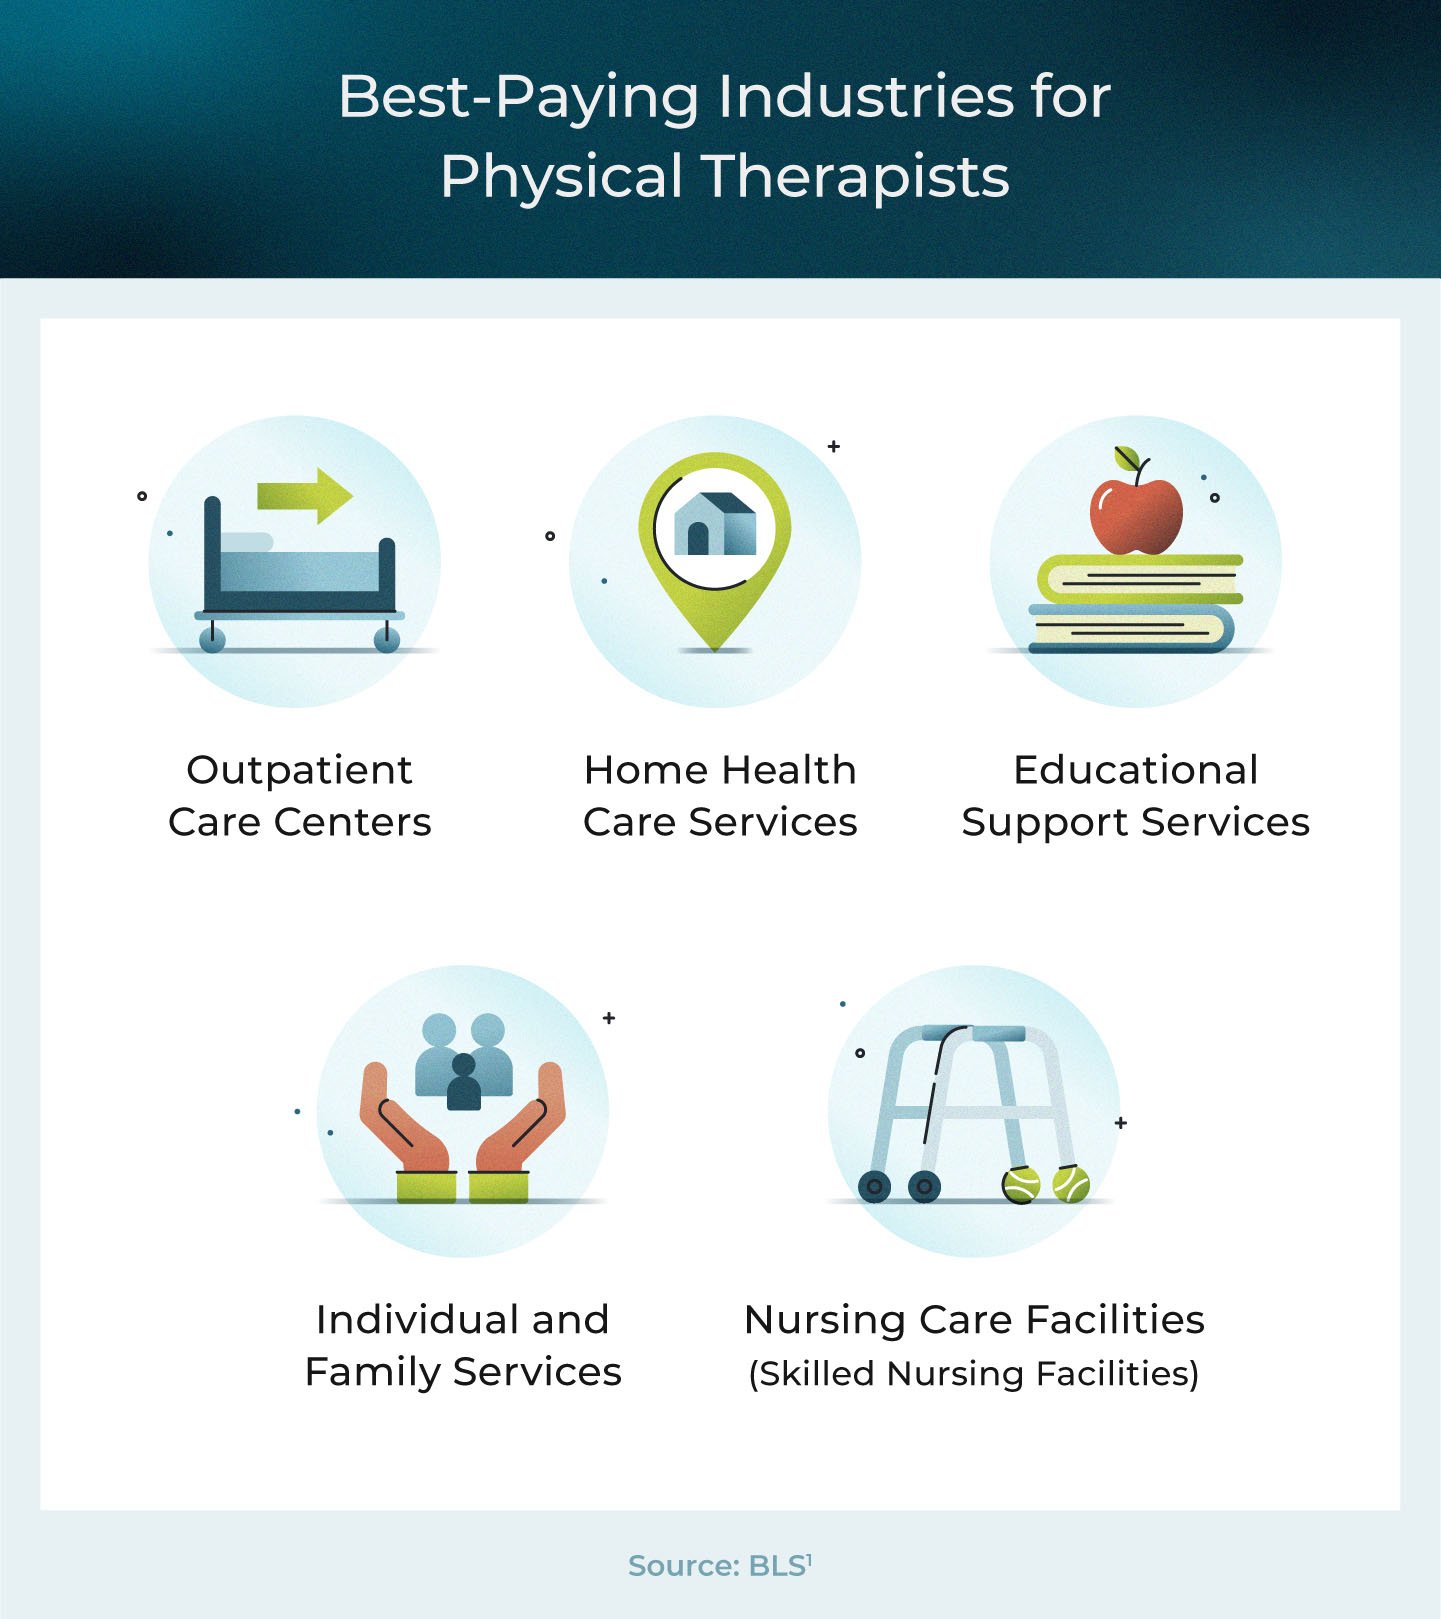 Best paying industries for physical therapists.